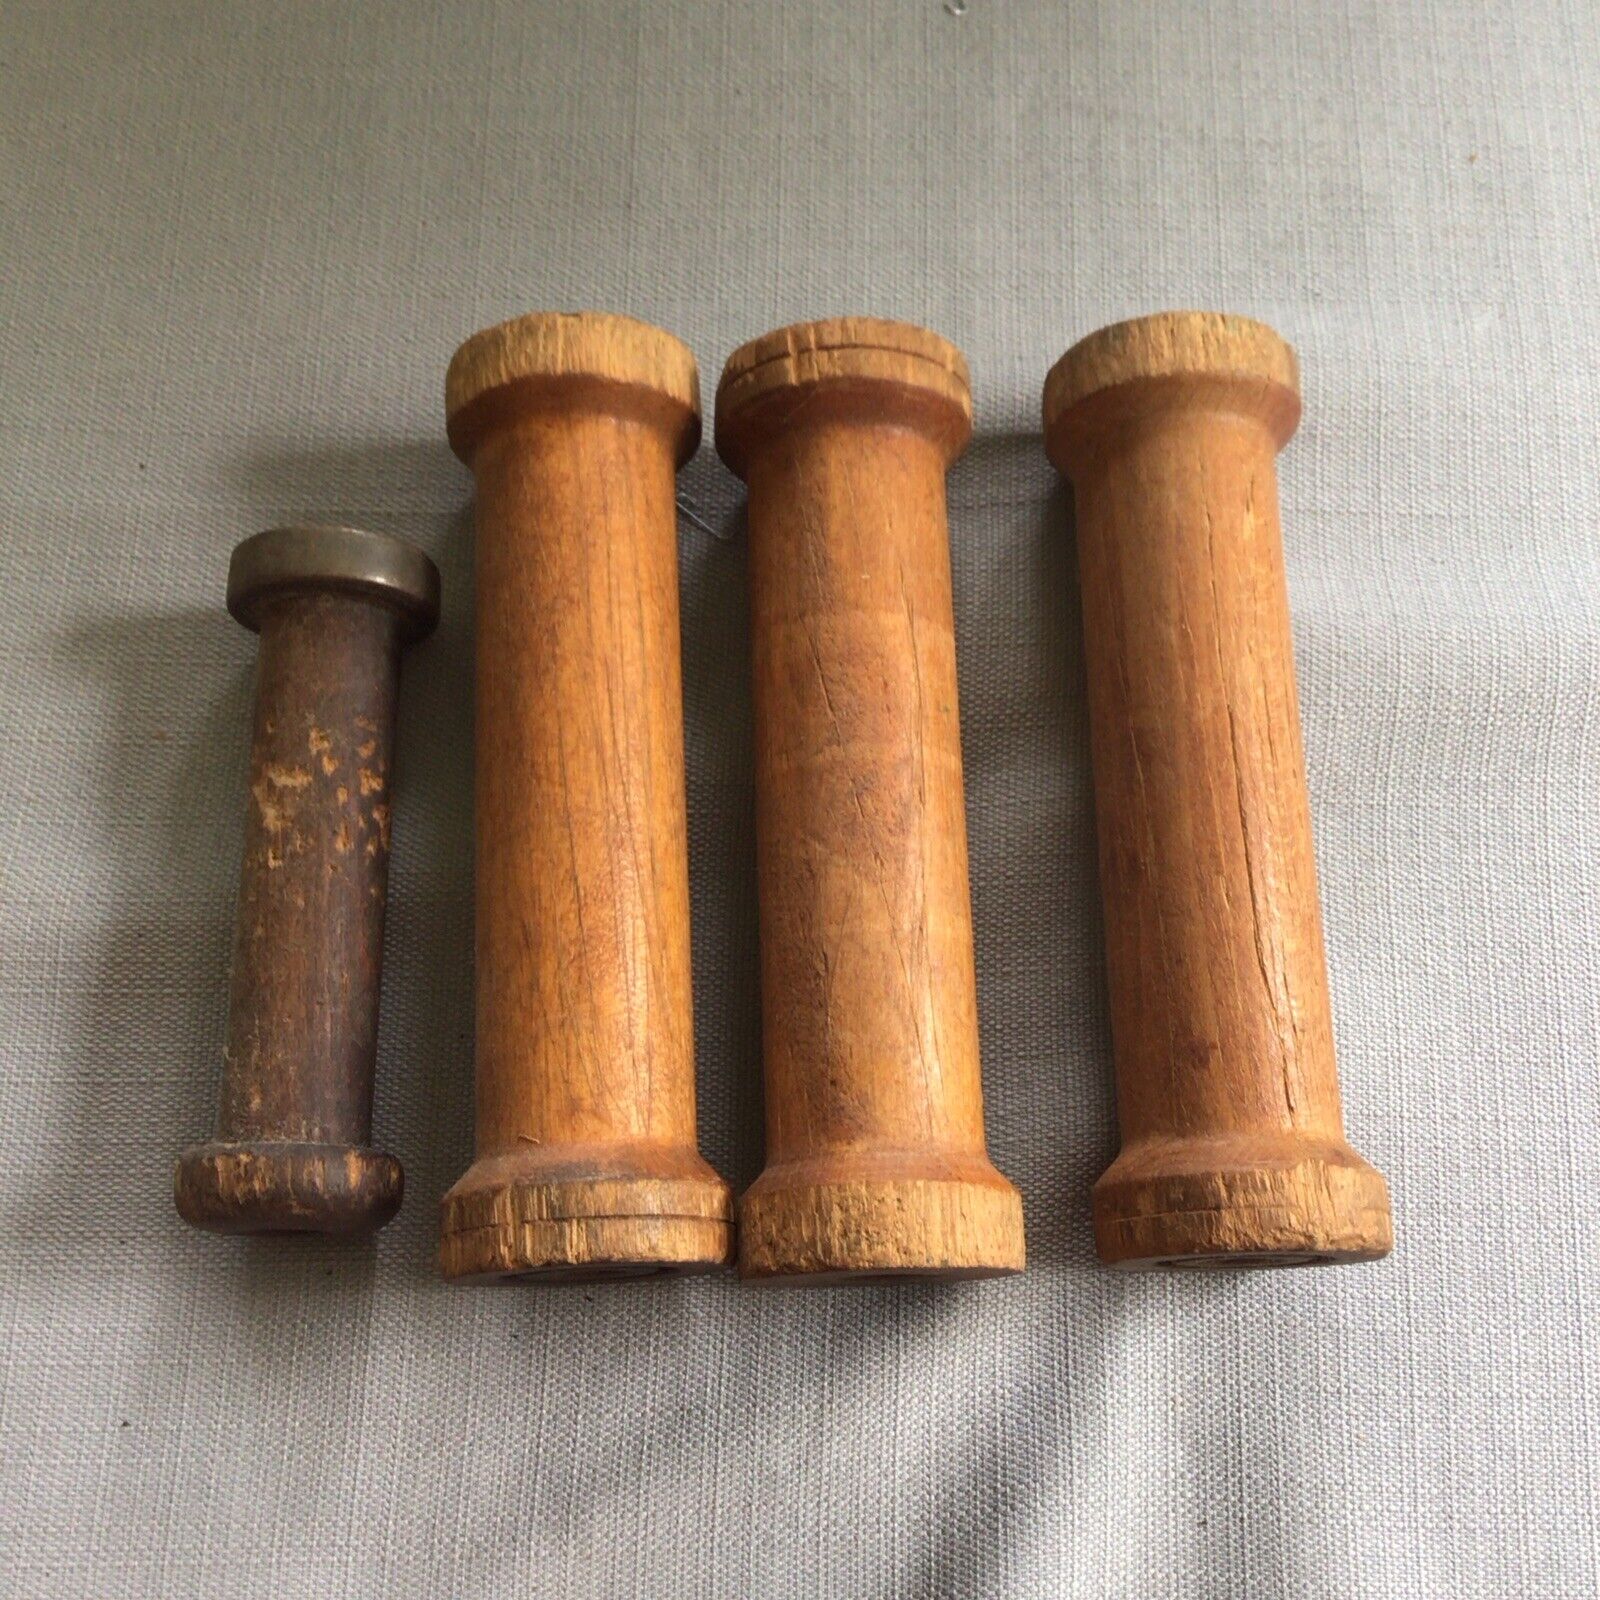 Lot of 4 Vintage Textile Sewing Spools 3-7” & 1-5”